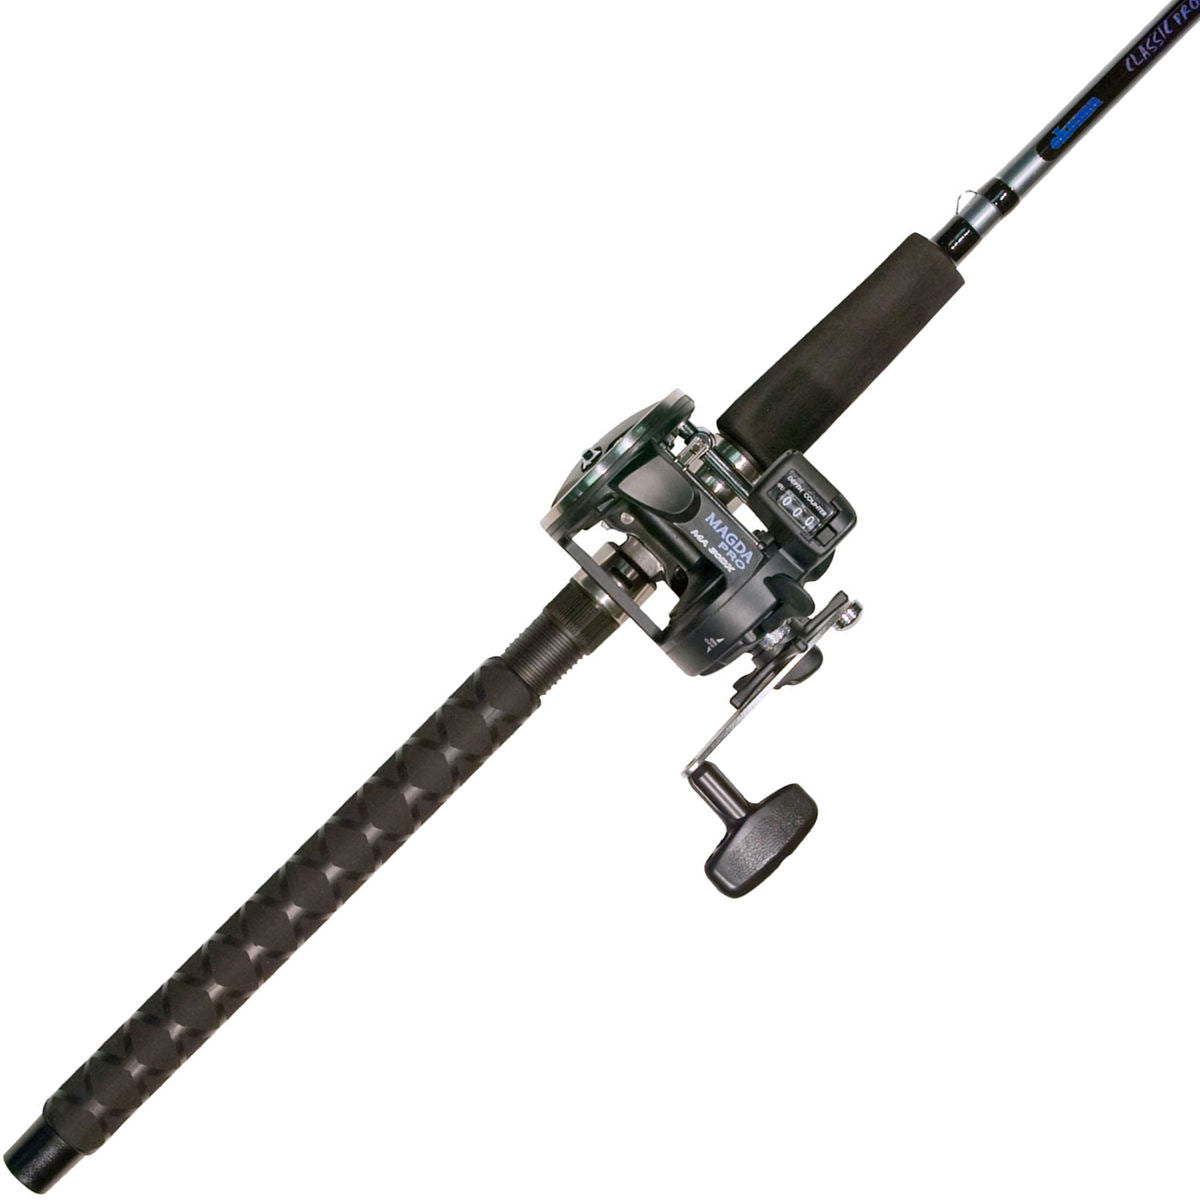 Photo of Okuma Great Lakes Trolling Combo for sale at United Tackle Shops.